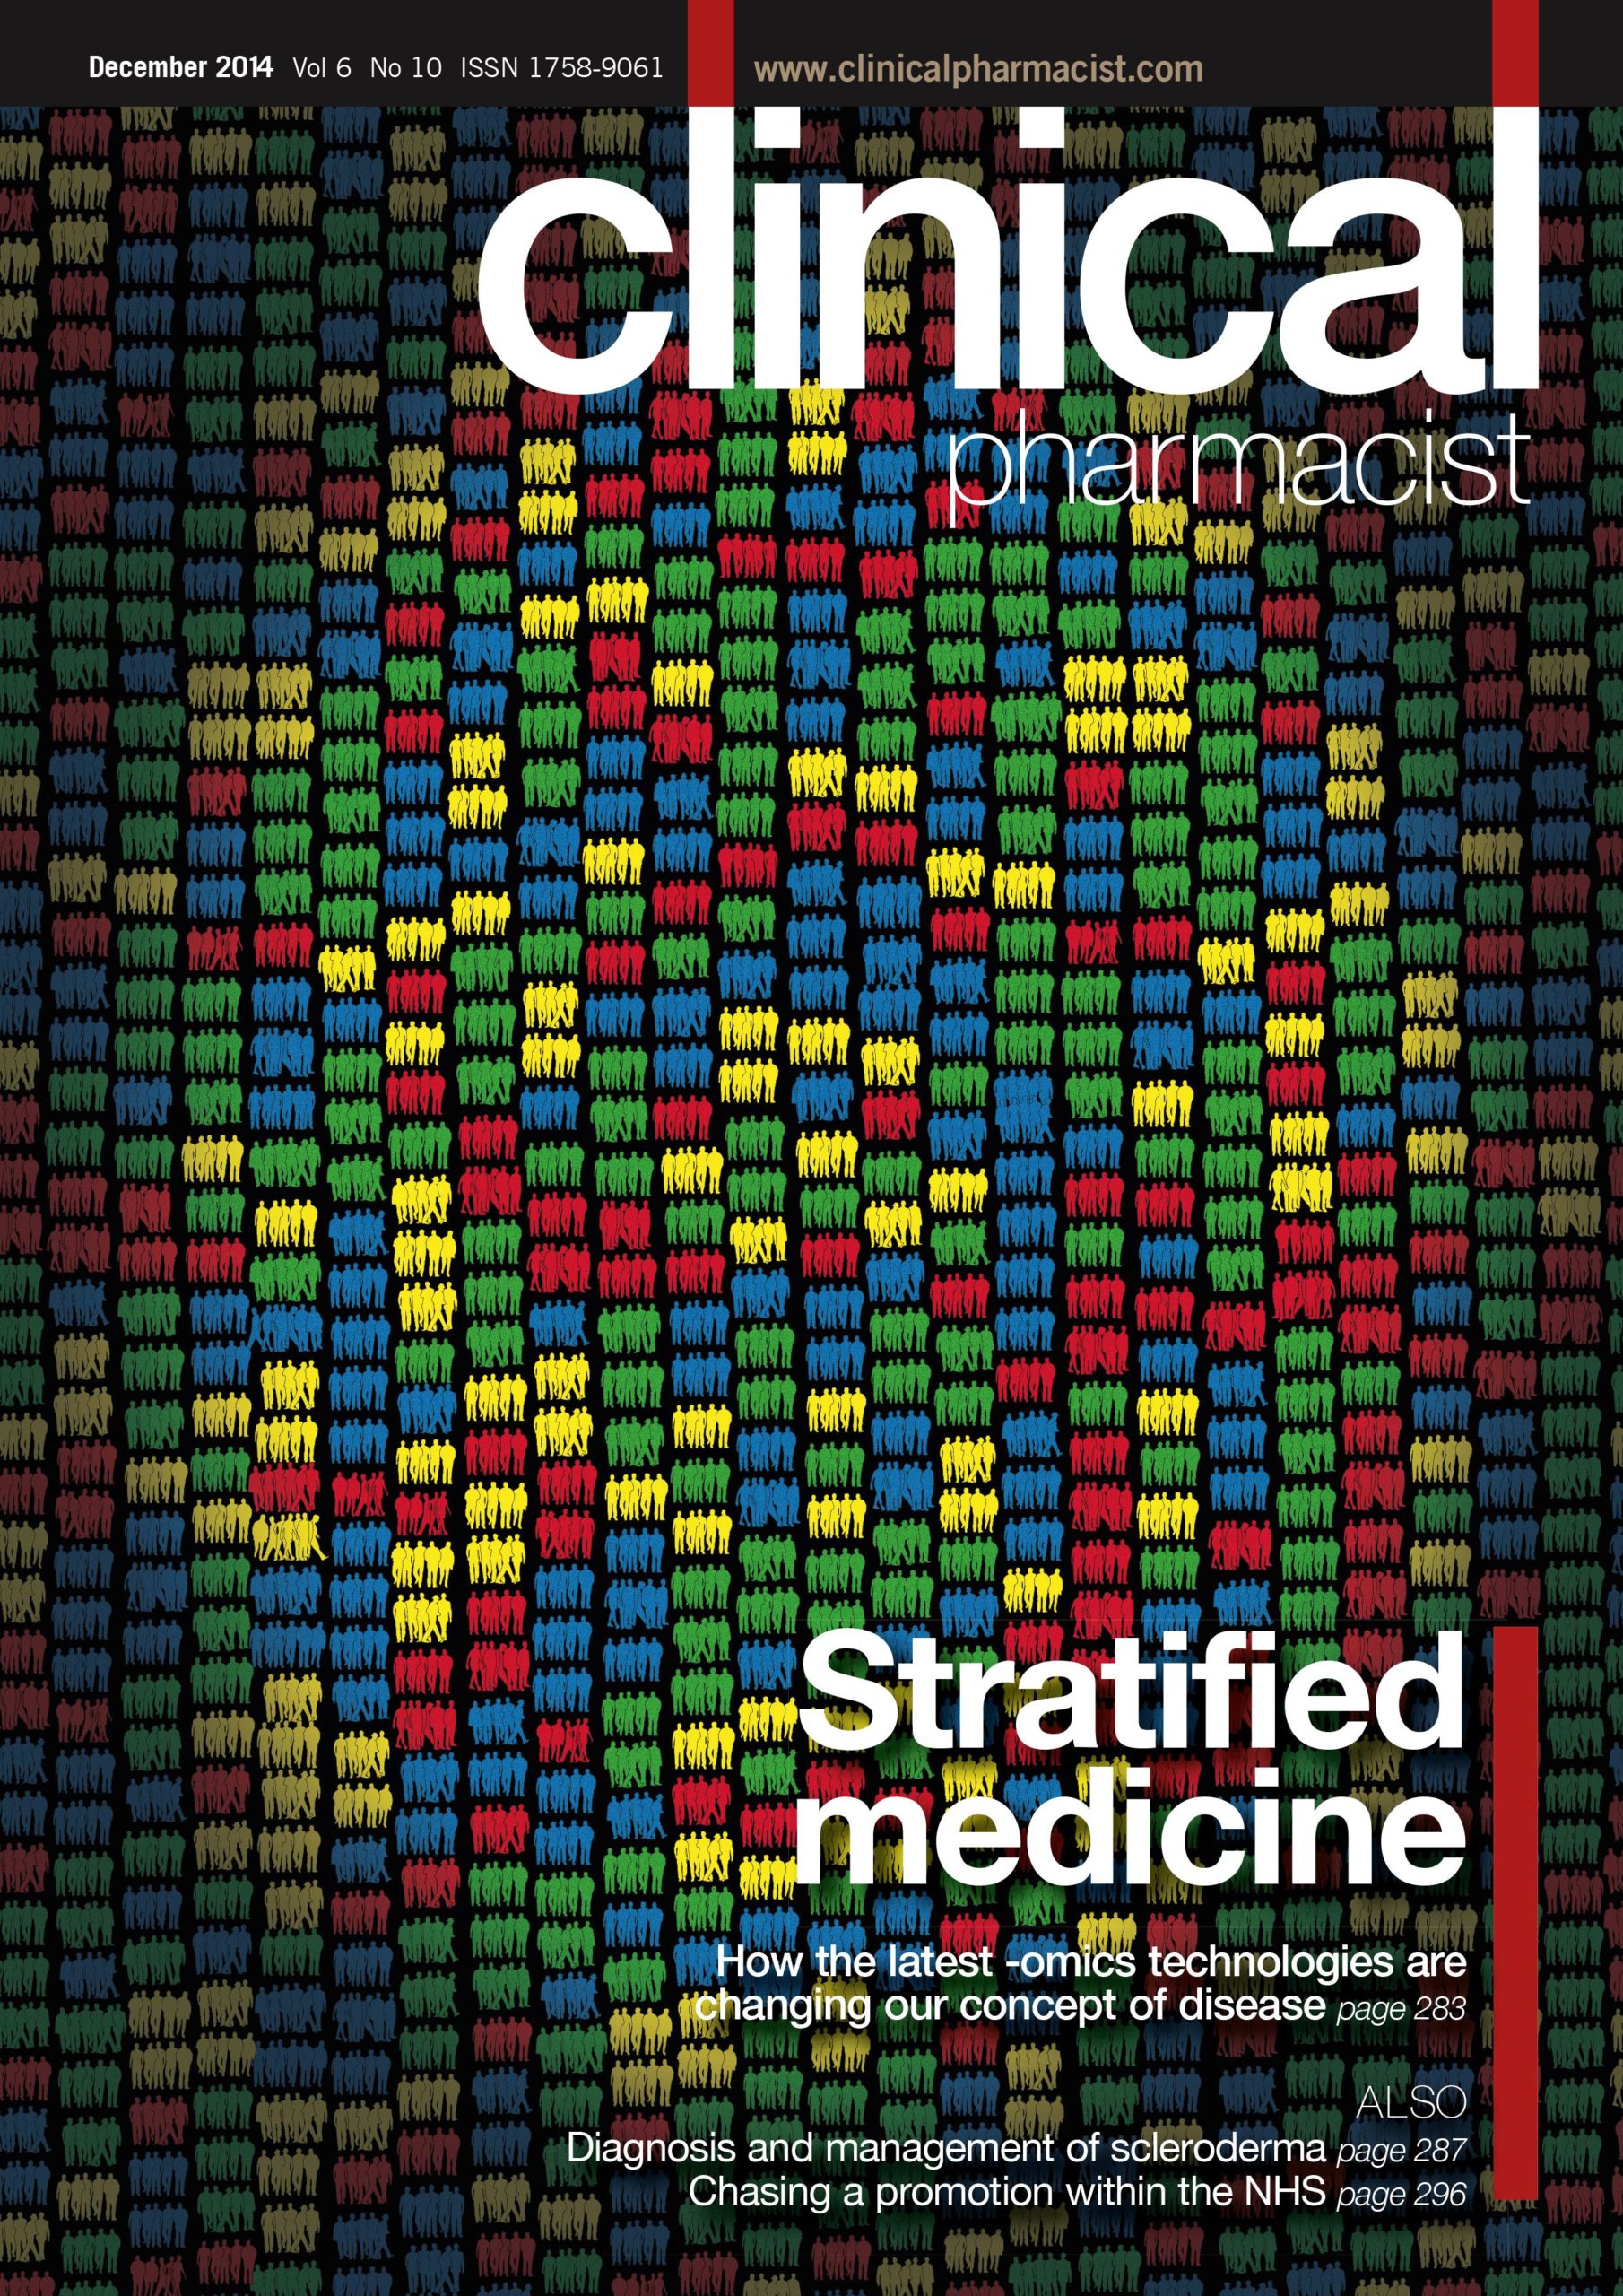 Publication issue cover for CP, December 2014, Vol 6, No 10